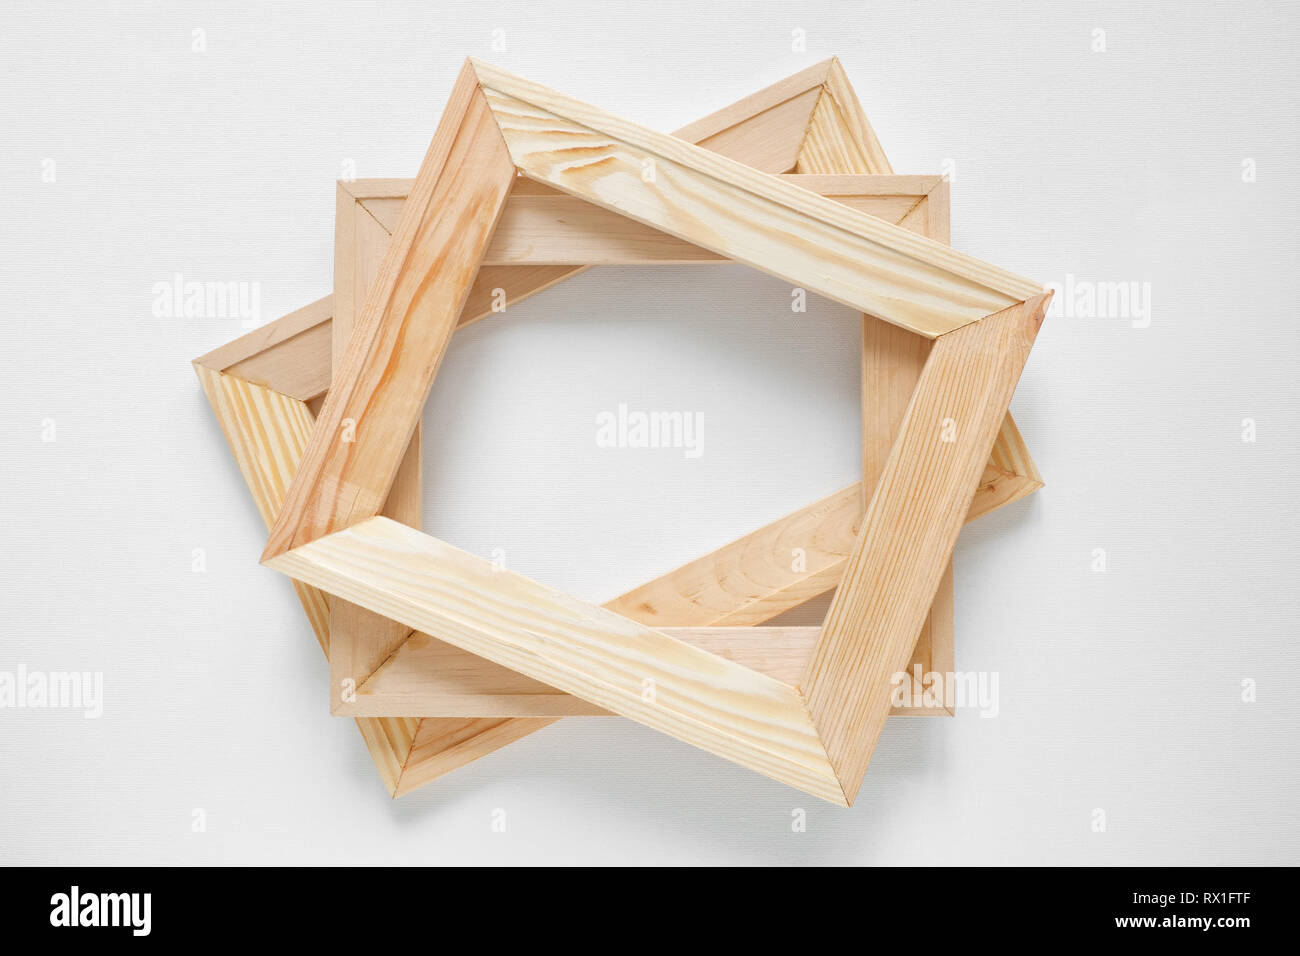 Wooden stretcher bars on white artist canvas background. Top view. Stock Photo